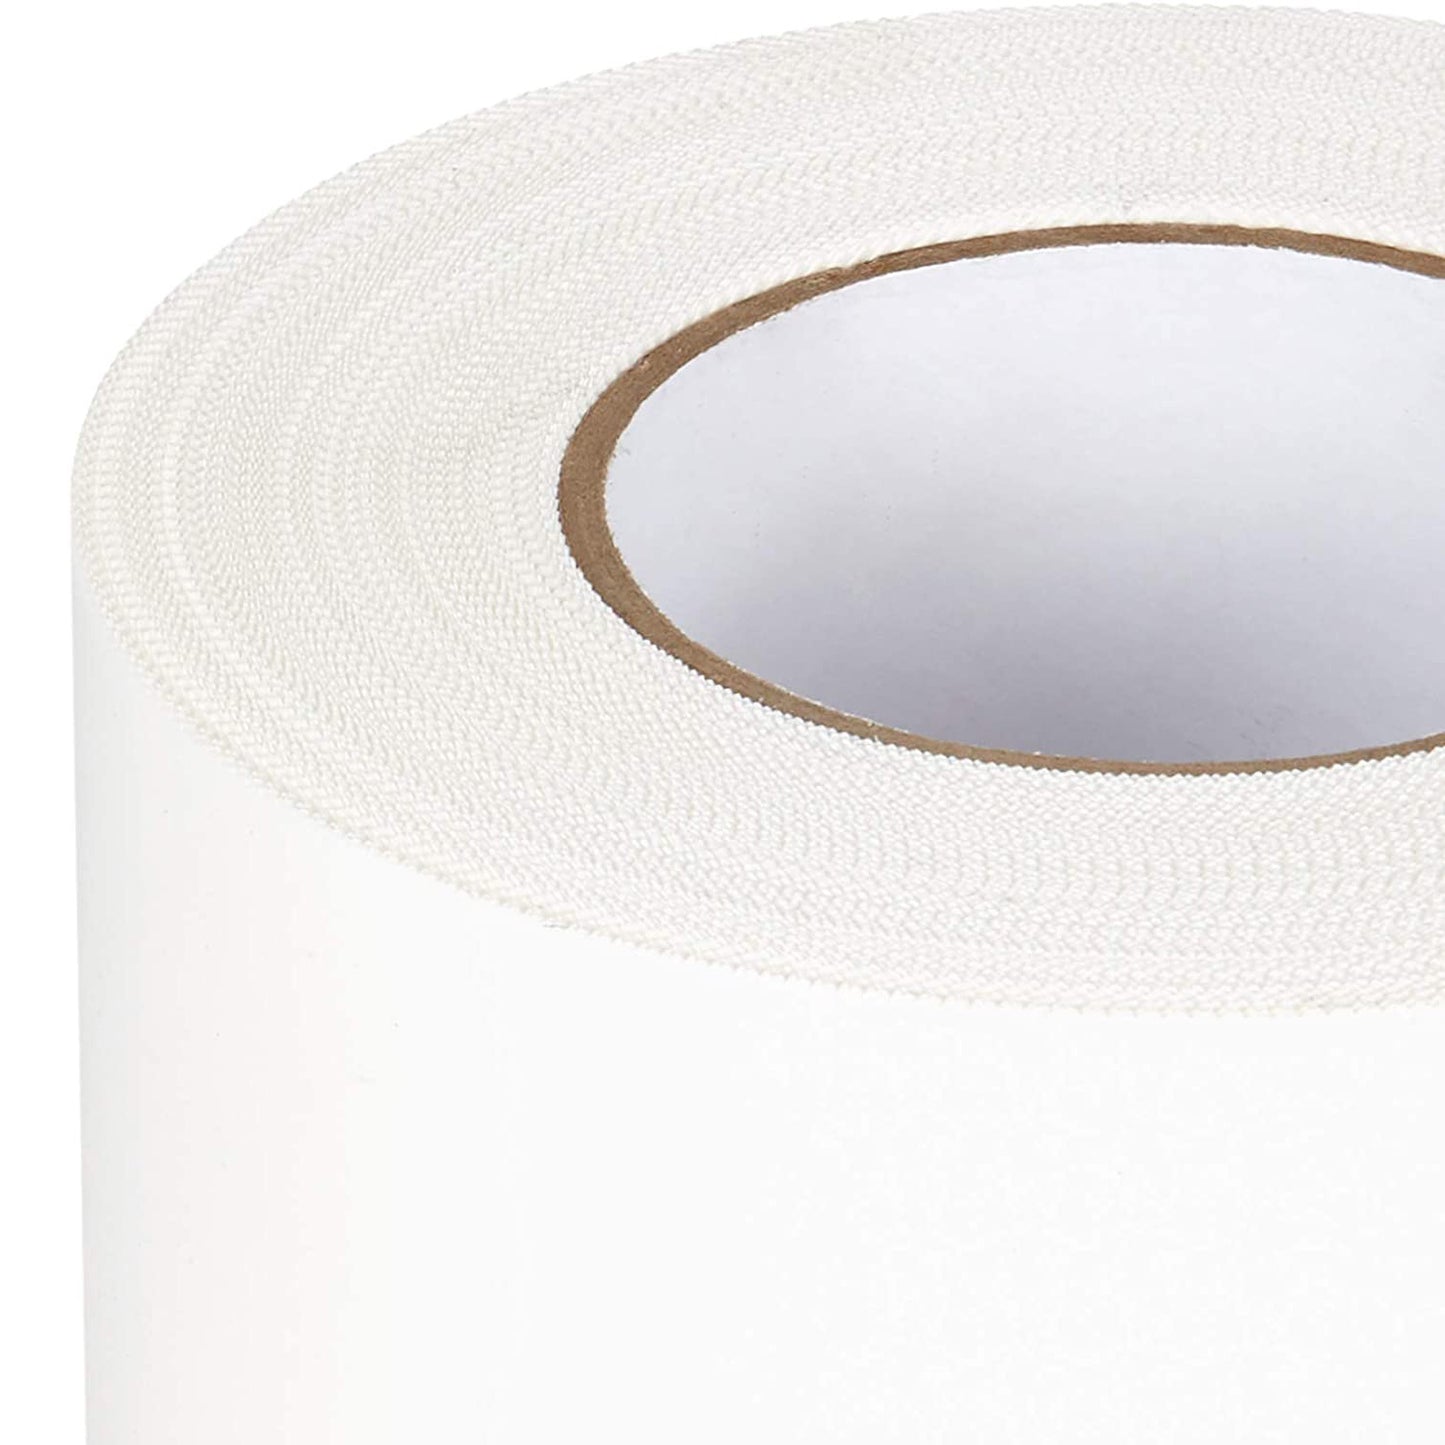 Detailed view of white seam tape